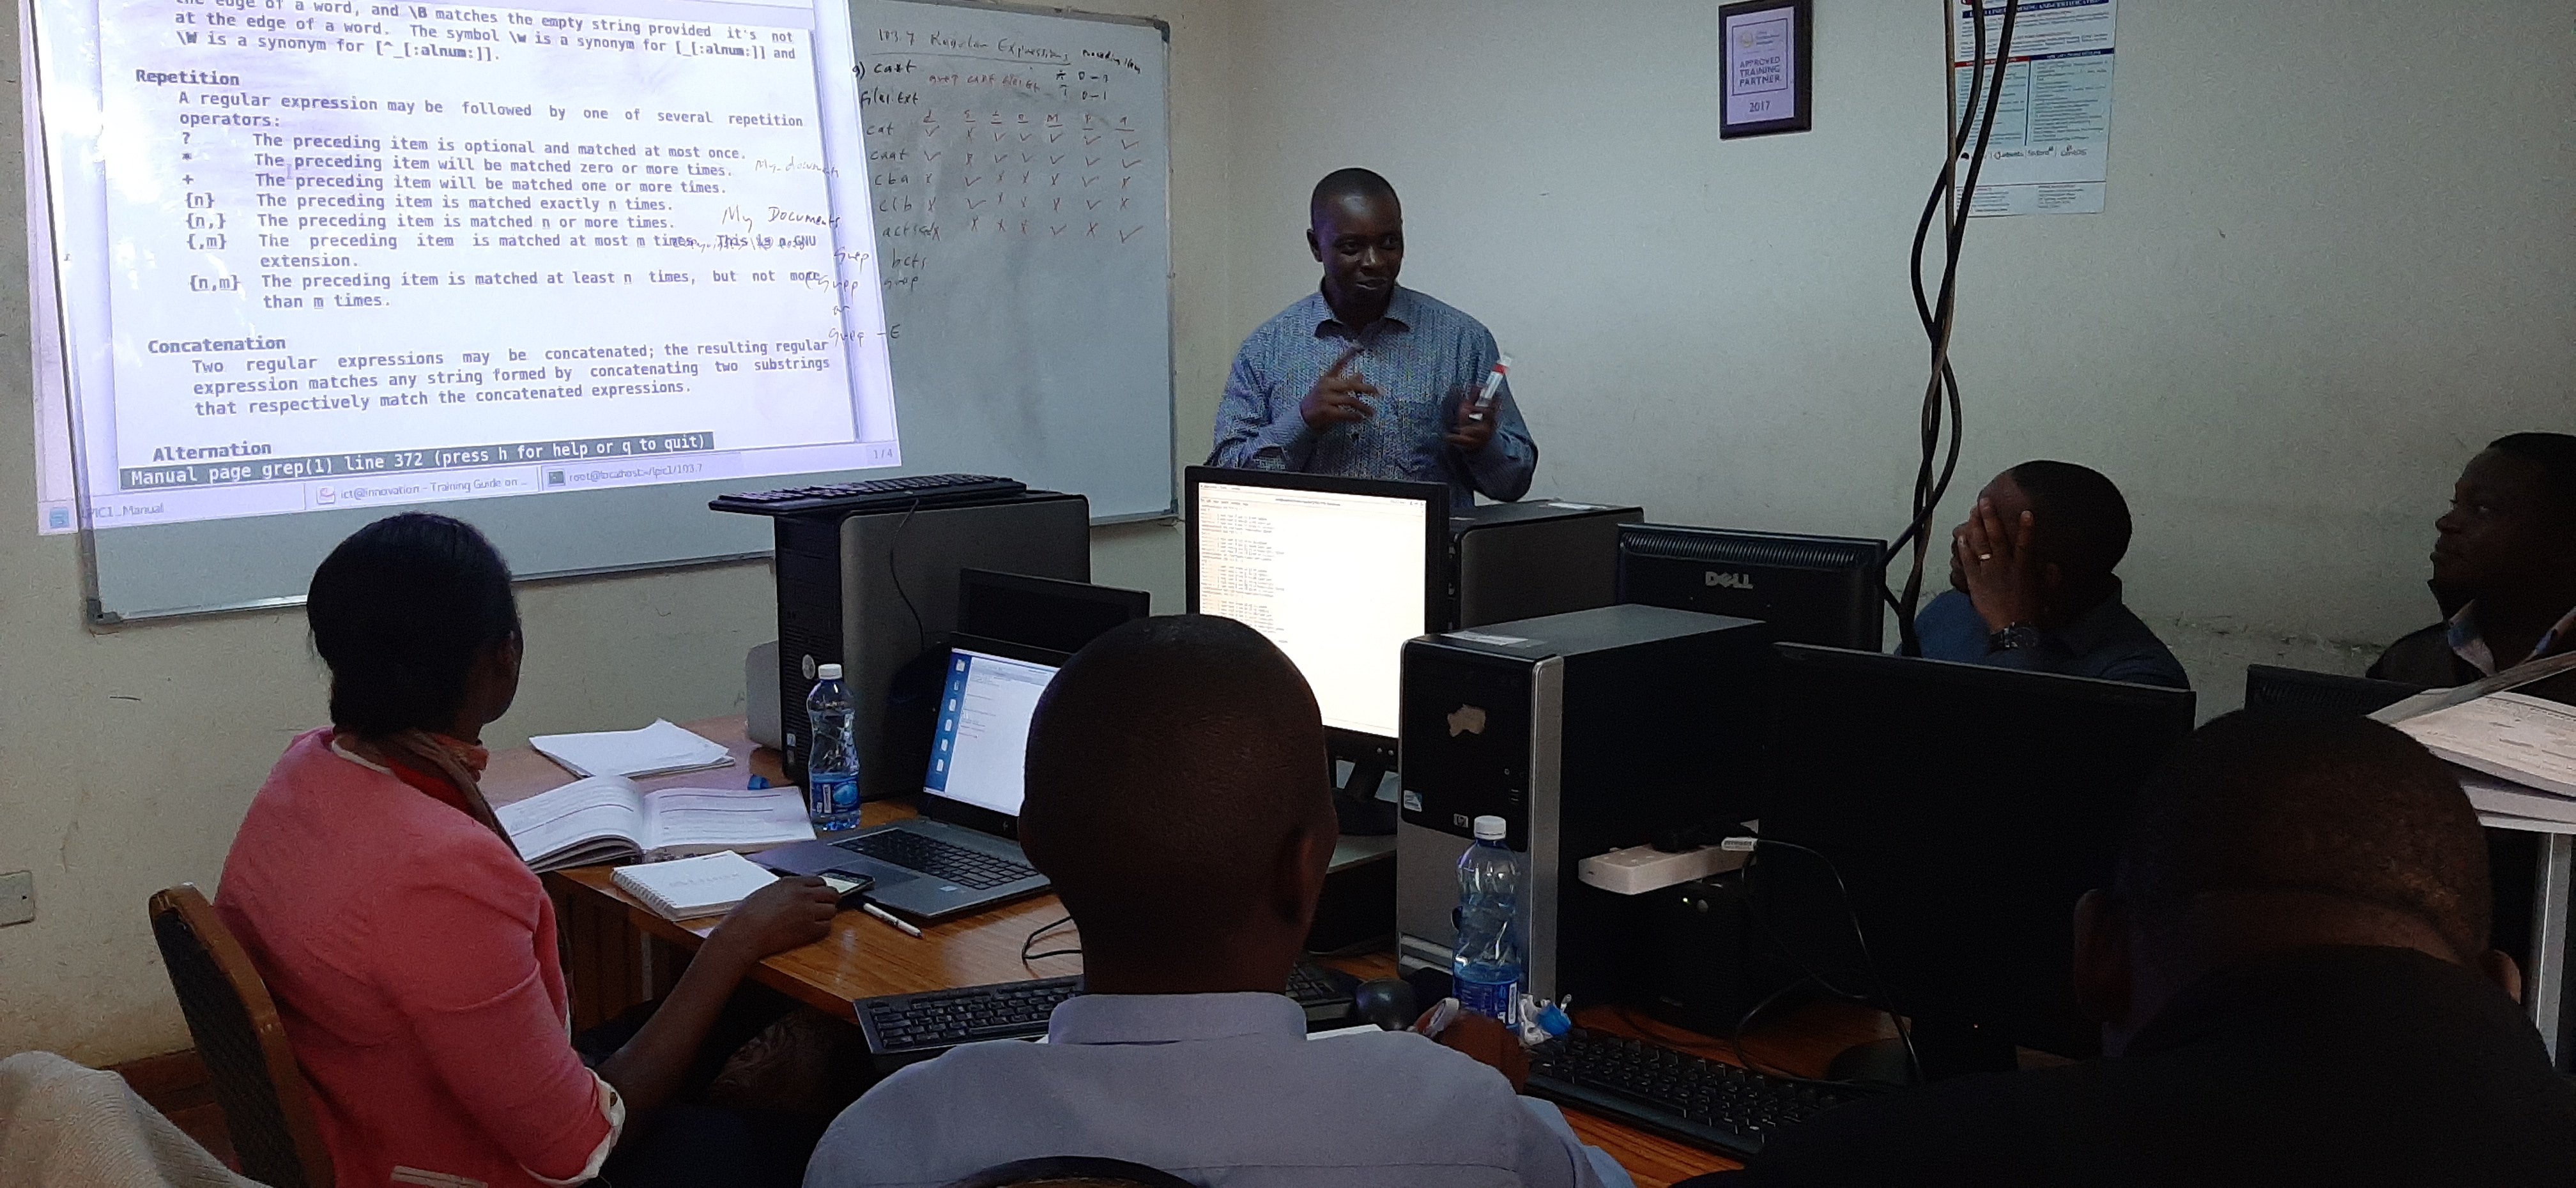 LPIC 1 LINUX SYSTEM ADMINISTRATION CERTIFICATION TRAINING IN PROGRESS AT LINUX LEARNING CENTRE LTD.